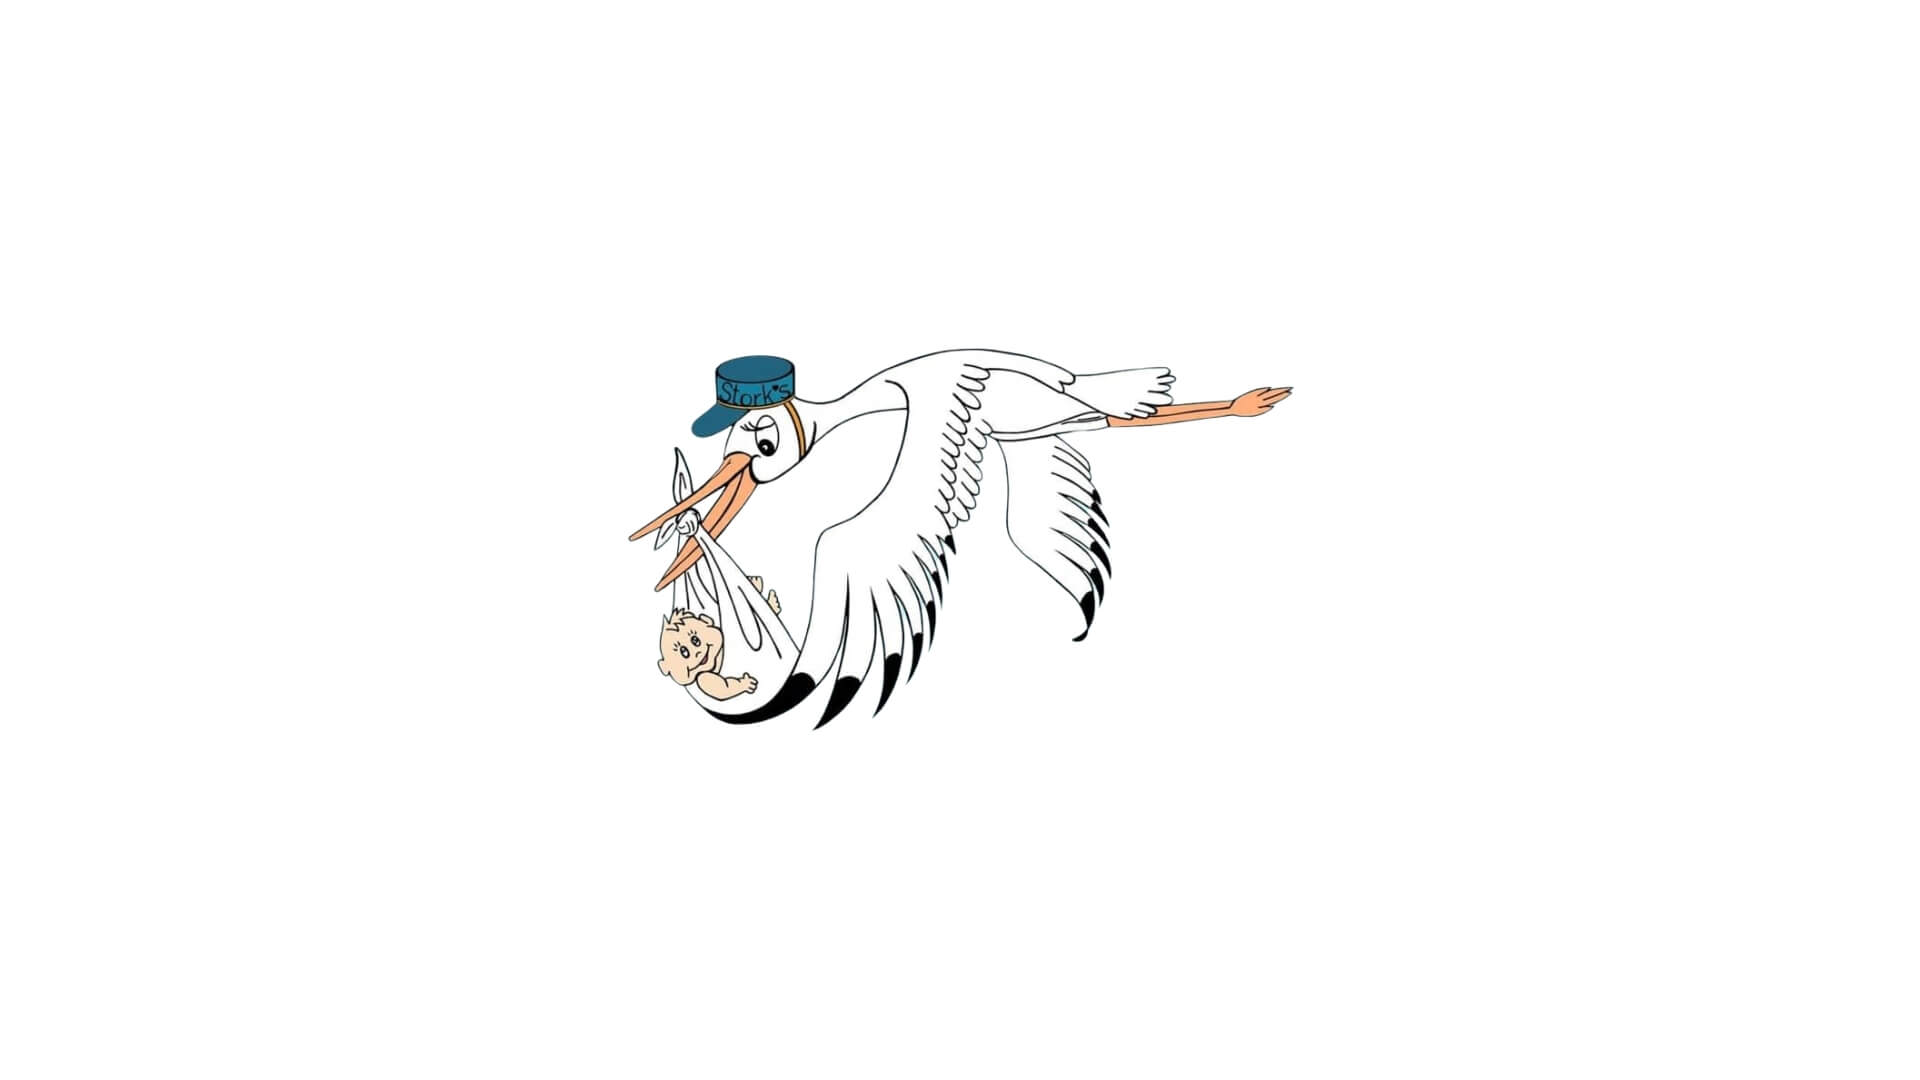 Timmins Care Illustration of a stork wearing a cap, flying while carrying a baby bundled in a cloth in its beak. Cochrane District Social Services Administration Board